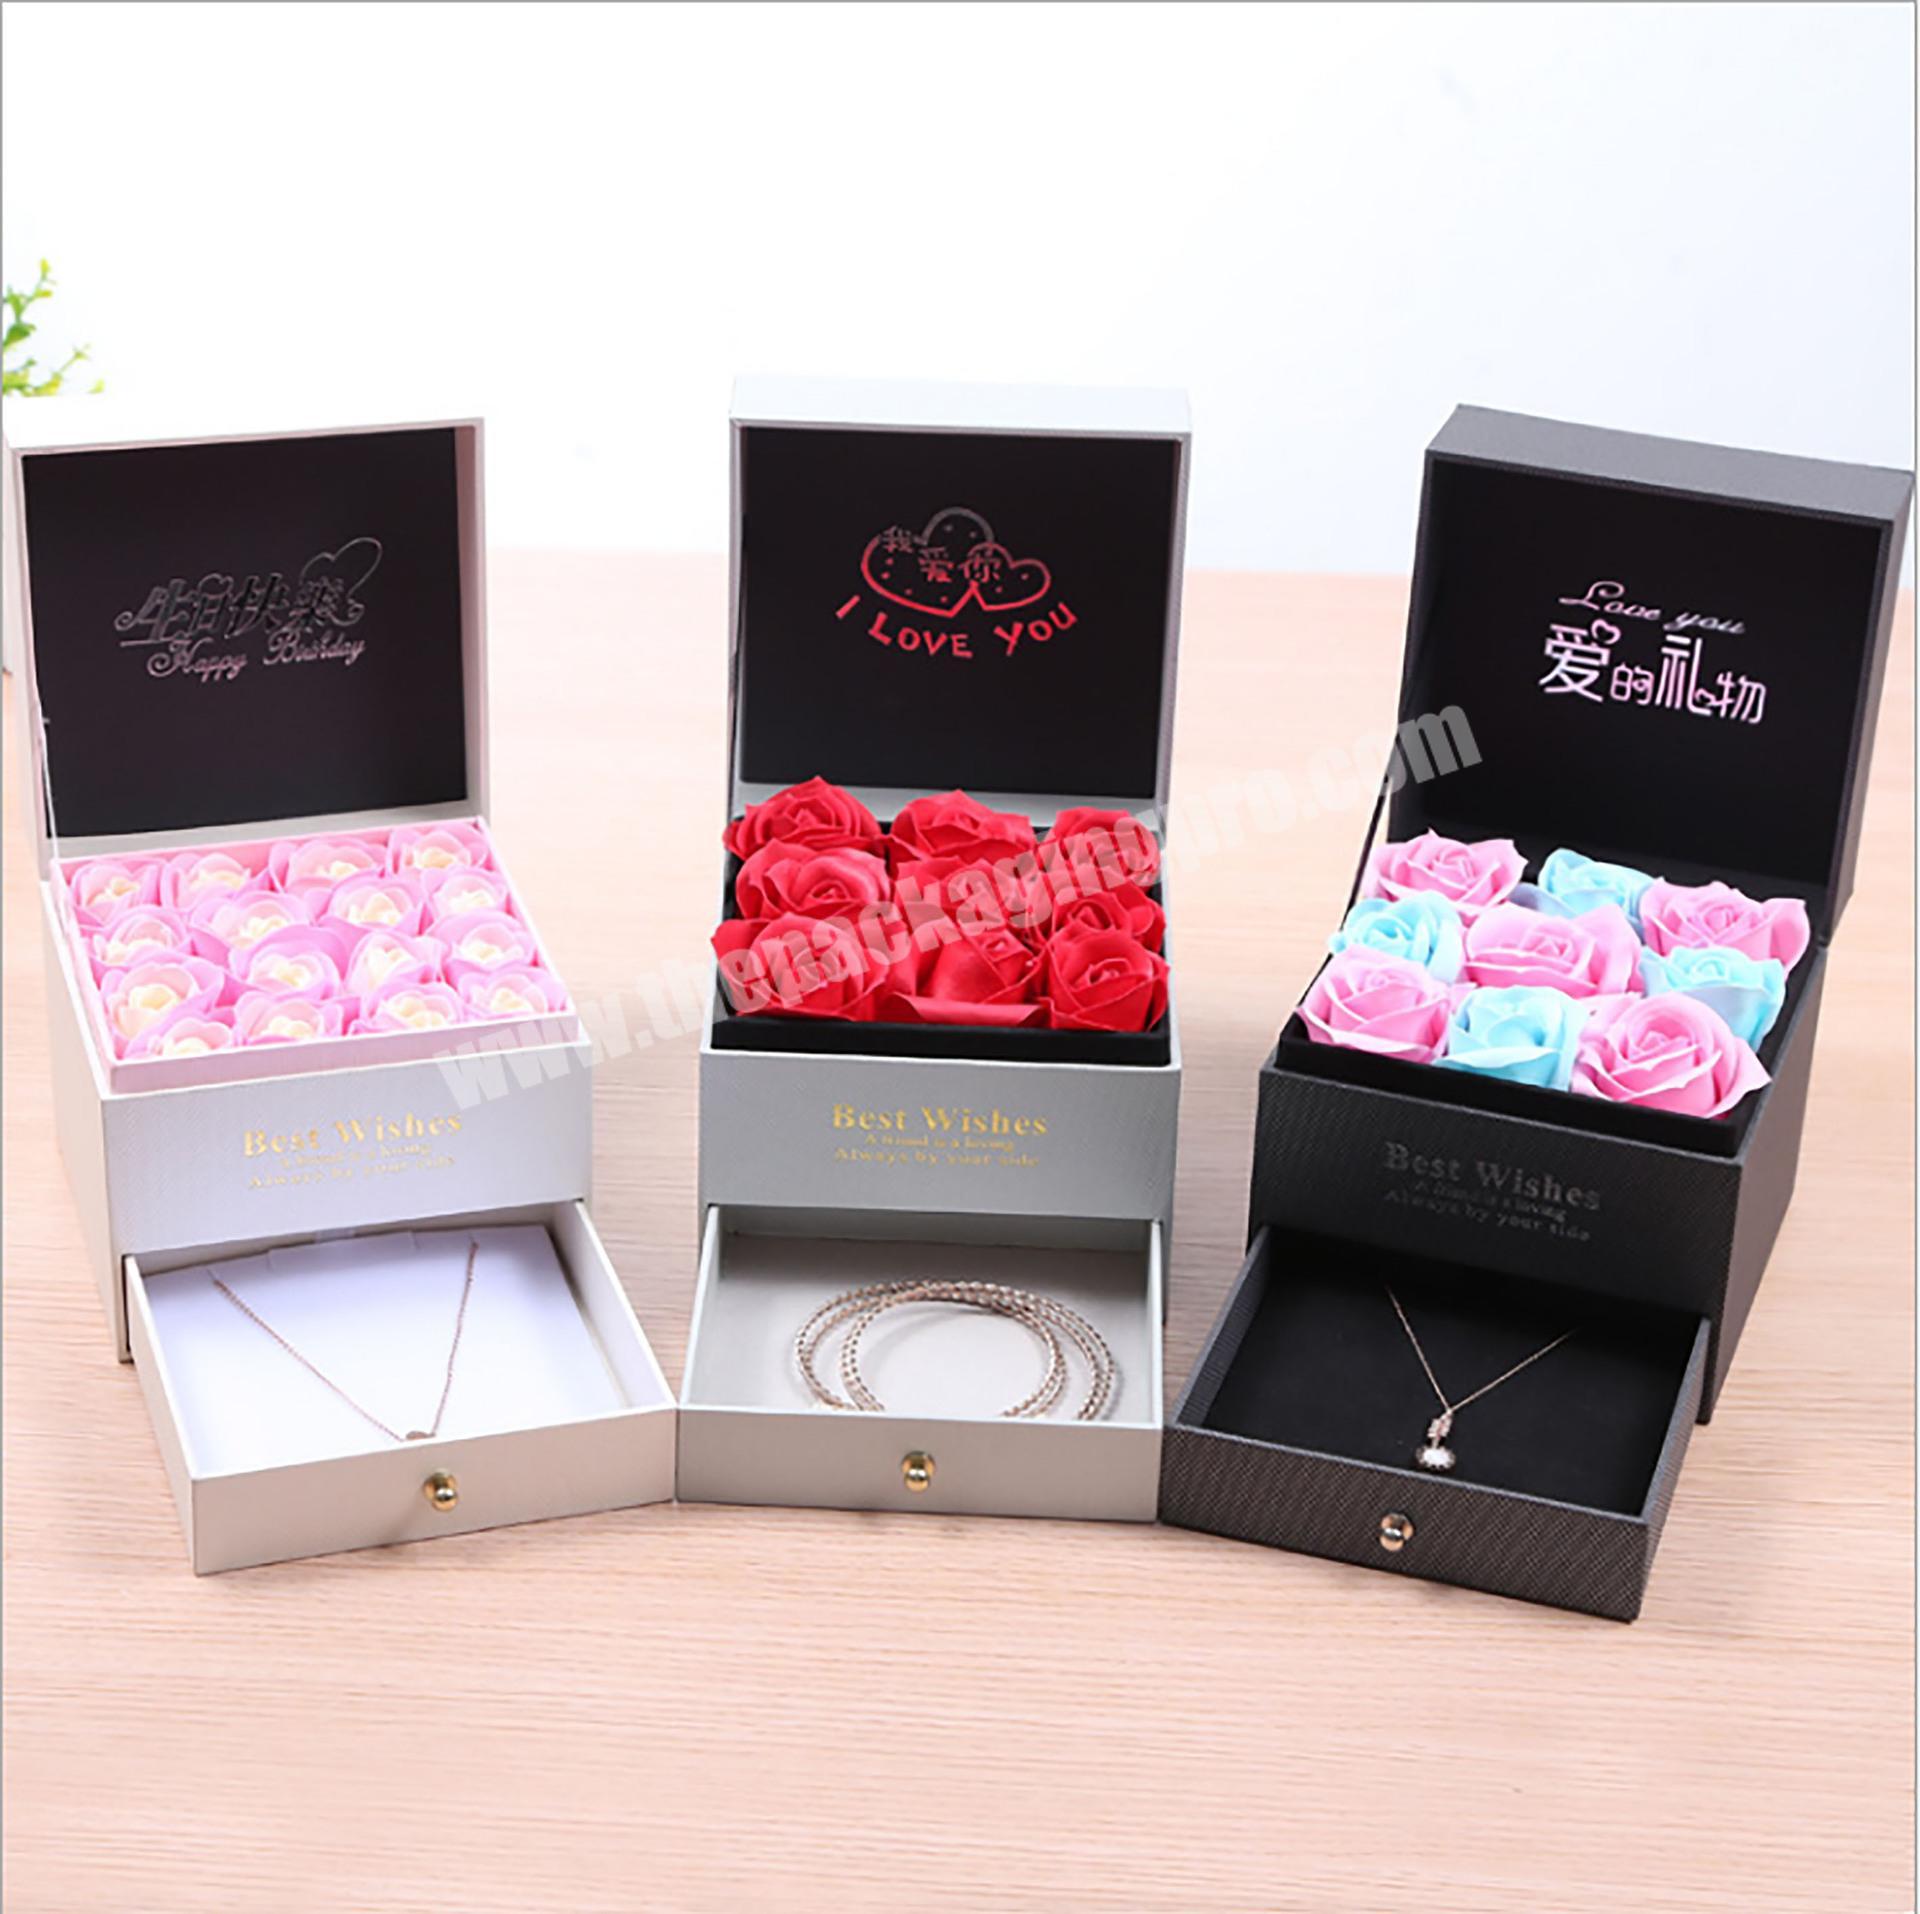 https://www.thepackagingpro.com/media/goods/images/factory-customized-luxury-gift-box-with-drawers-for-gift-packaging-such-as-flowers_sSRwLKn.jpg